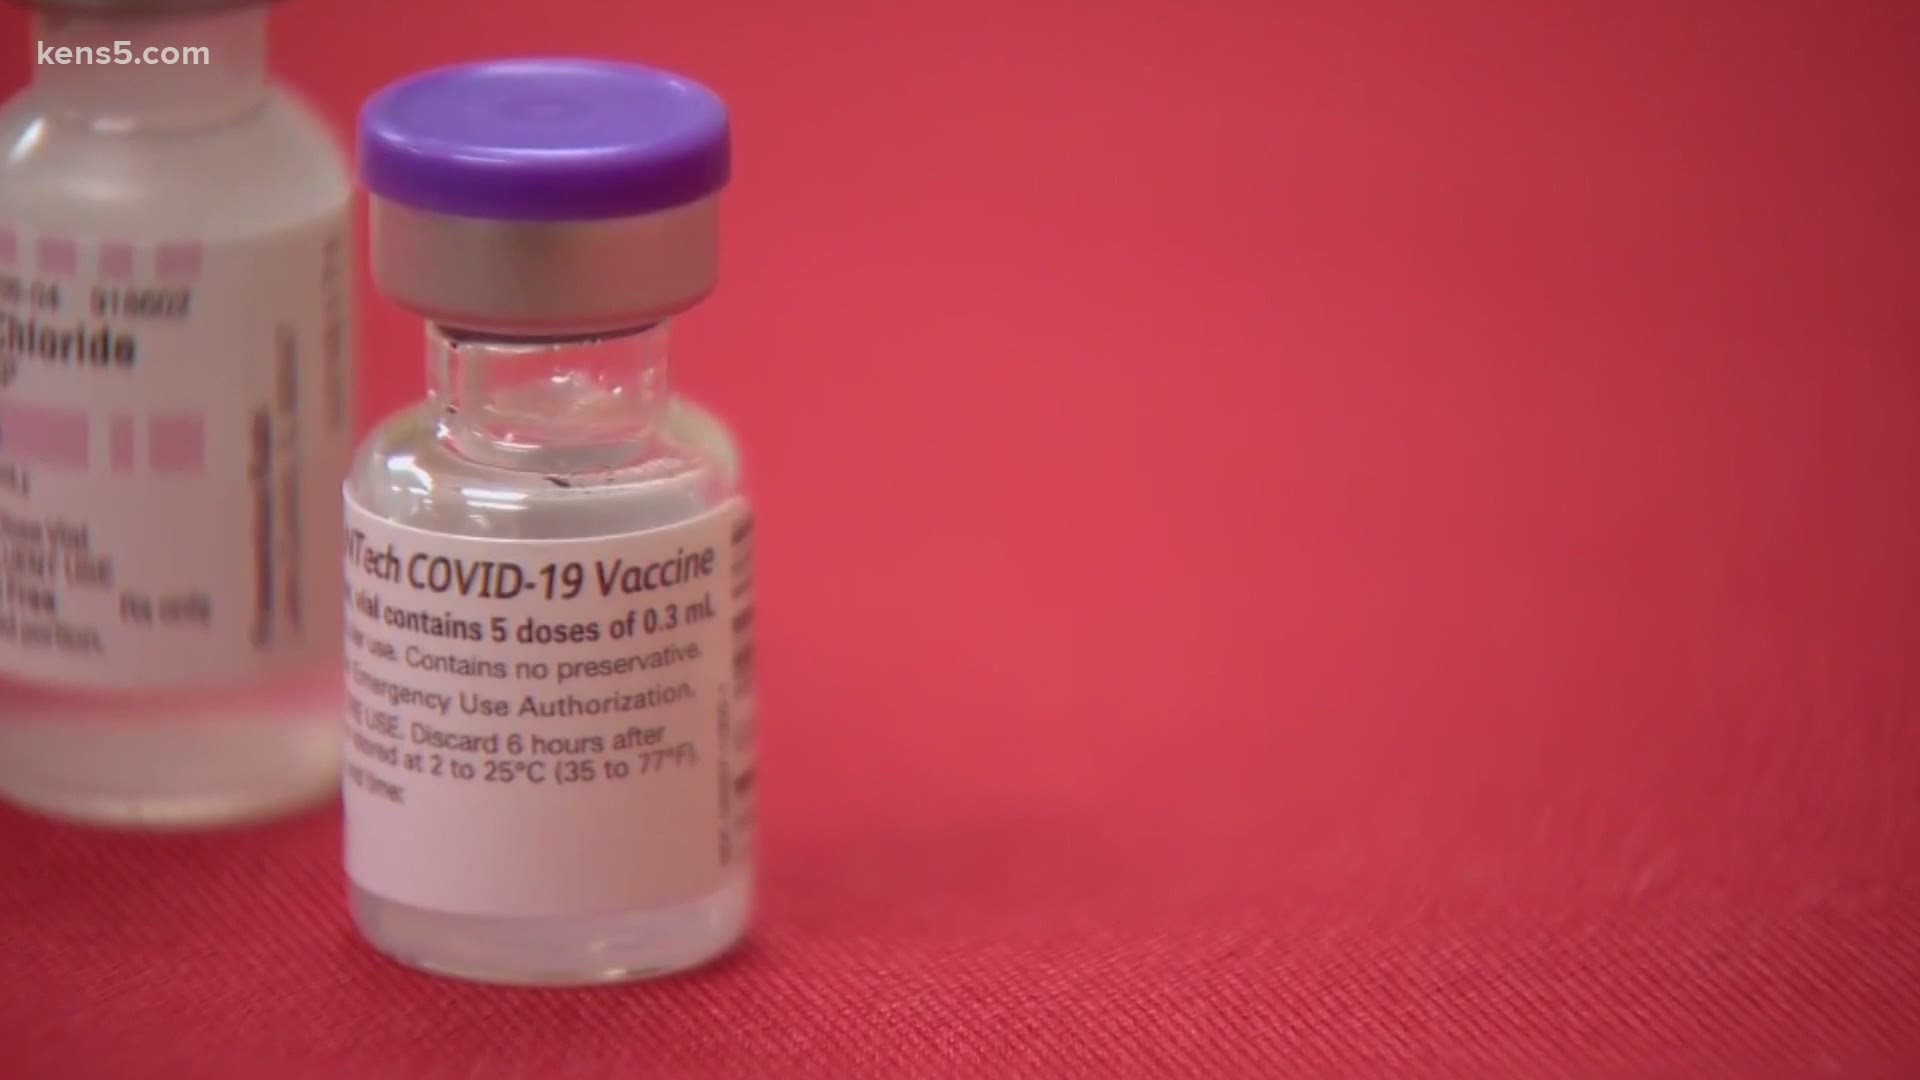 Dozens of faith leaders signed a letter stating their confidence in the vaccinations.